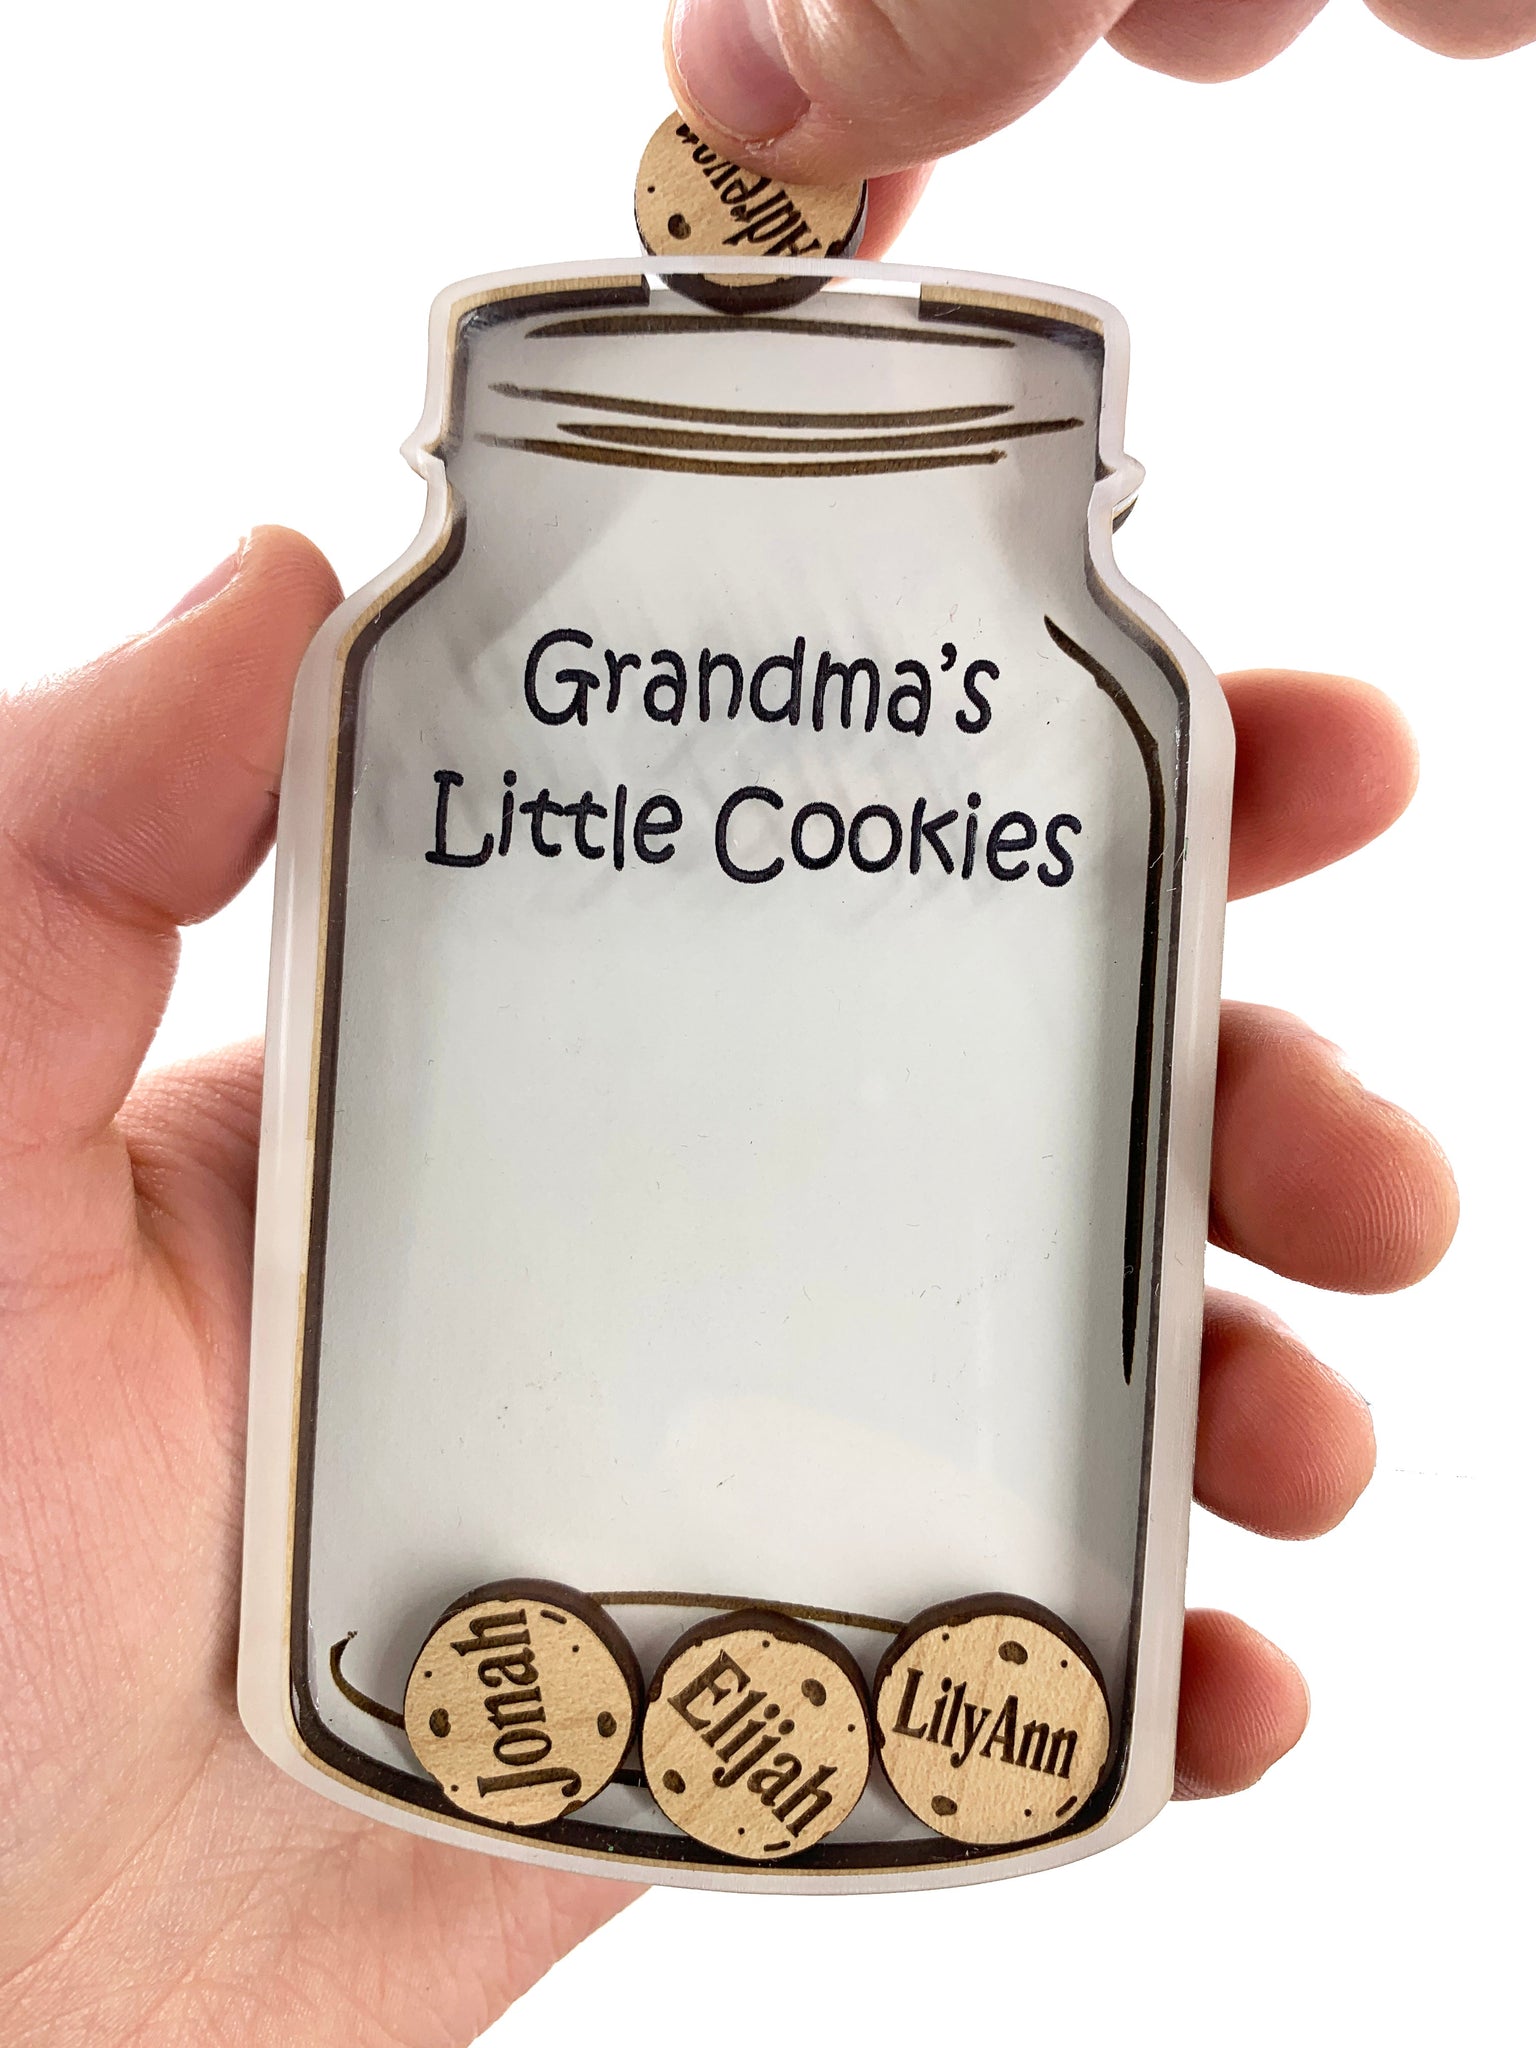 Are using cookie jars still a thing in 2021 or is that too 80's? I haven't  seen one since my grandparents were alive. I was wondering if people still  fill their jars